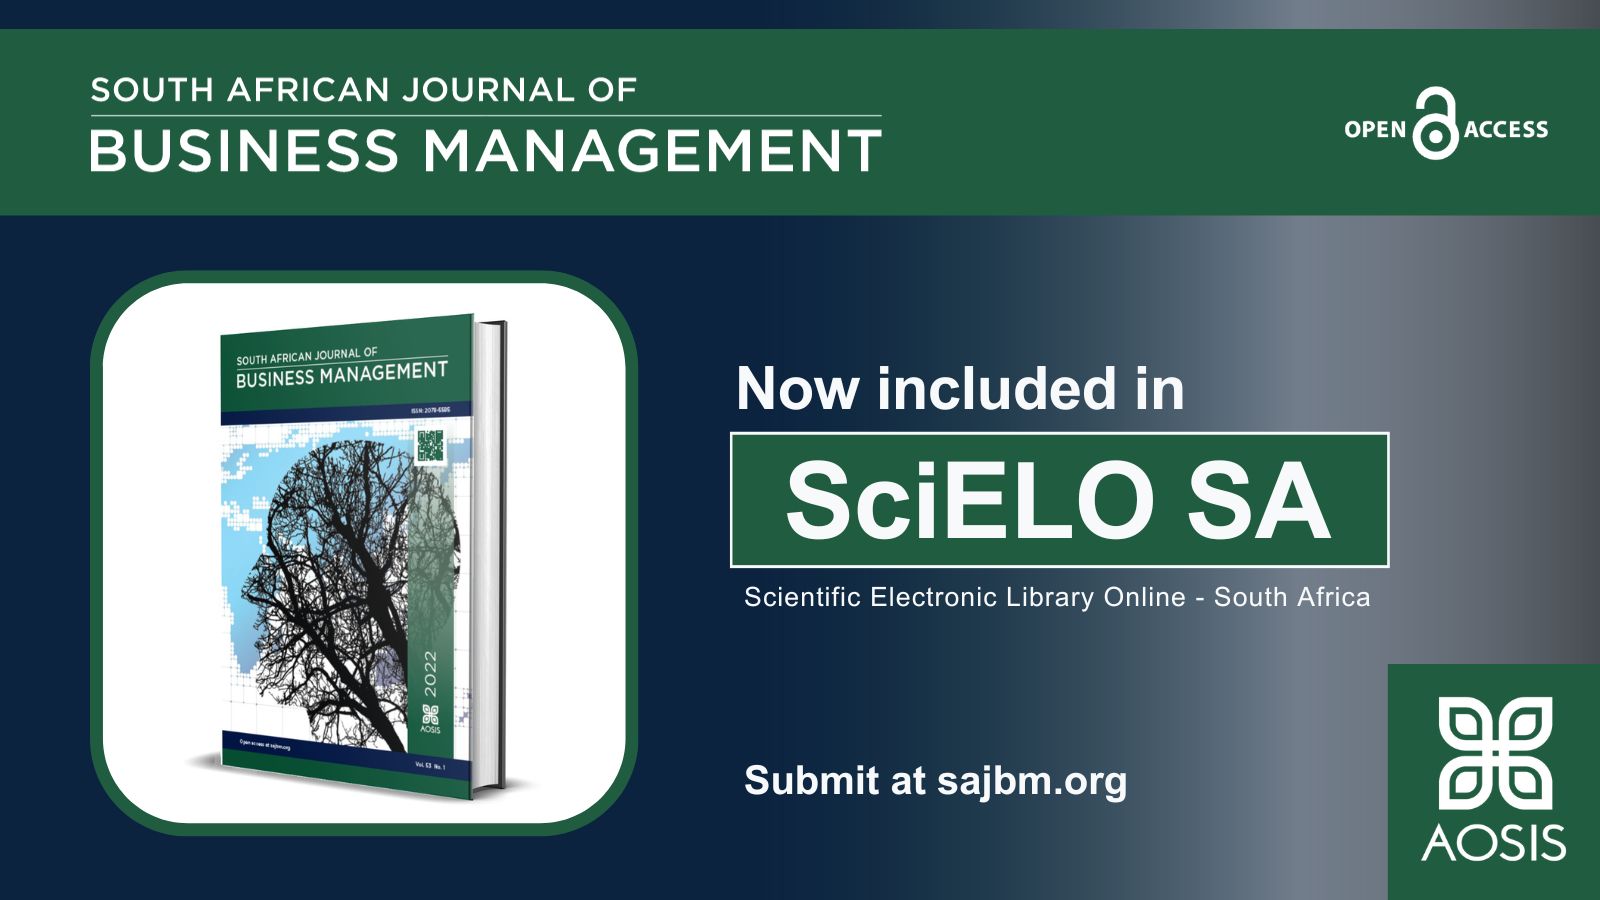 SciELO SA includes the South African Journal of Business Management